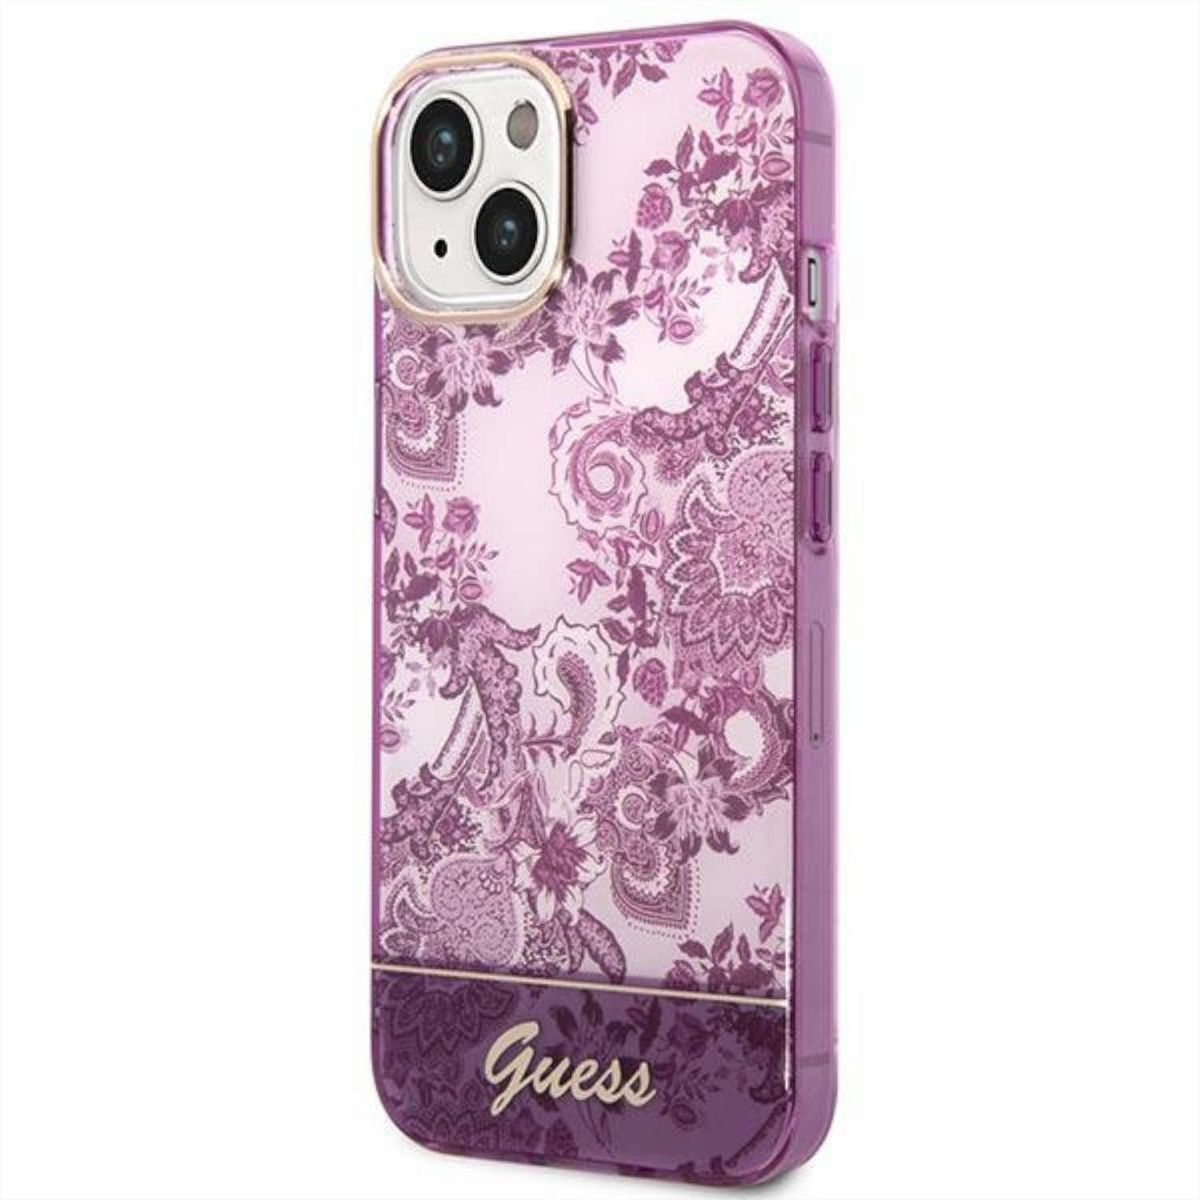 Lila Leder GUESS / Muster PC / Backcover, 14, Apple, Hülle, PU Design TPU iPhone